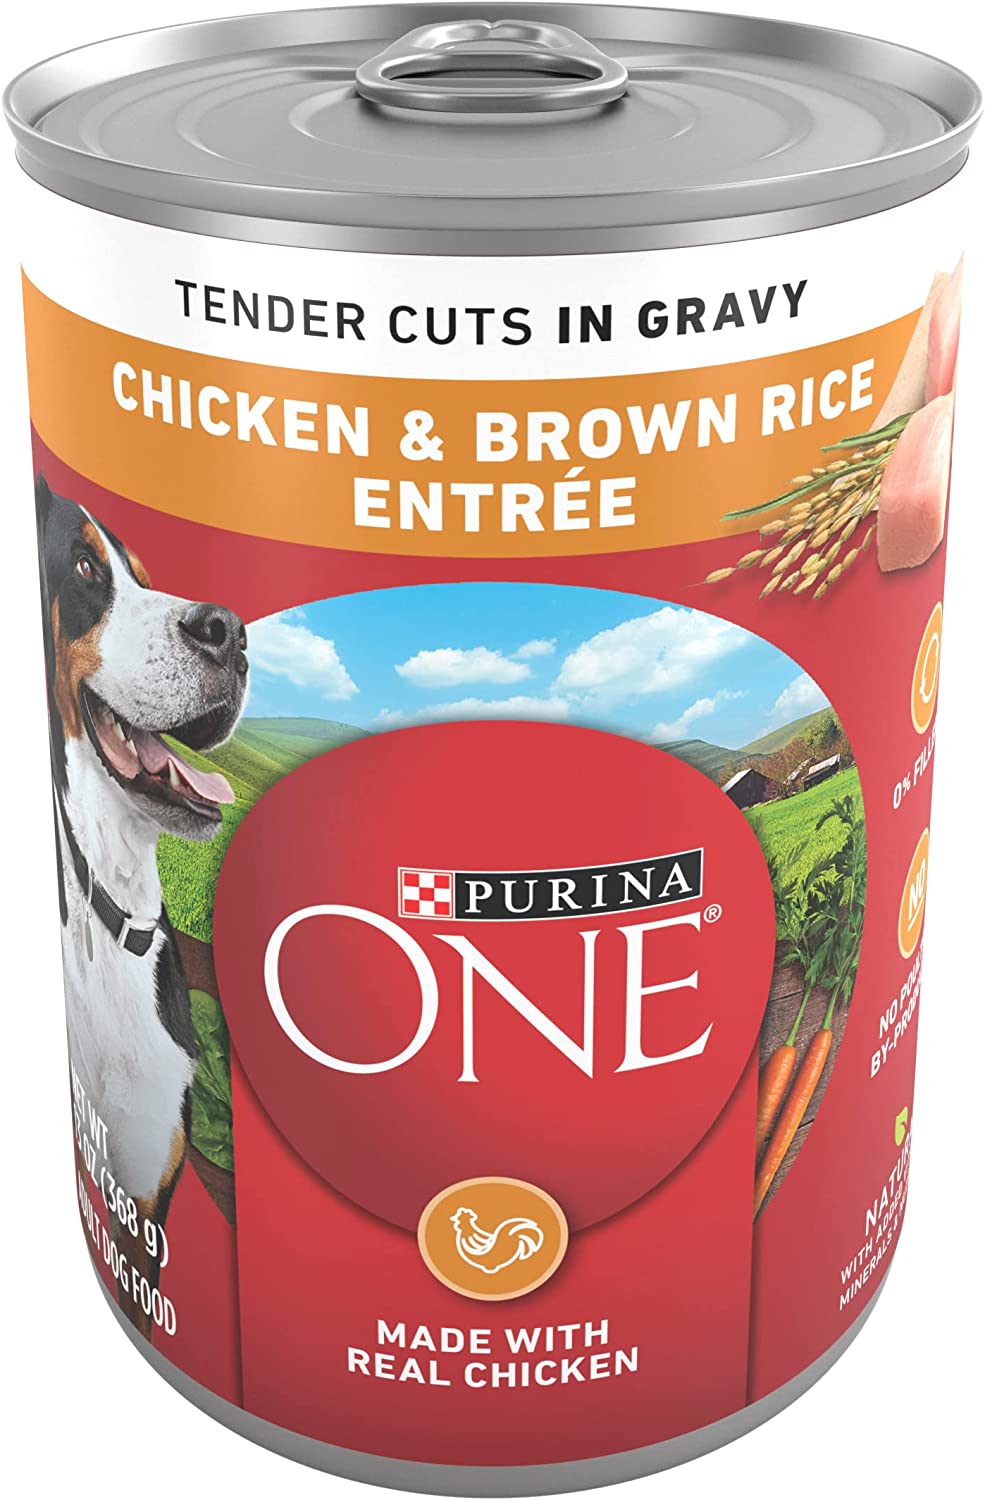 Purina ONE SmartBlend Tender Cuts in Gravy Lamb & Brown Rice Entree